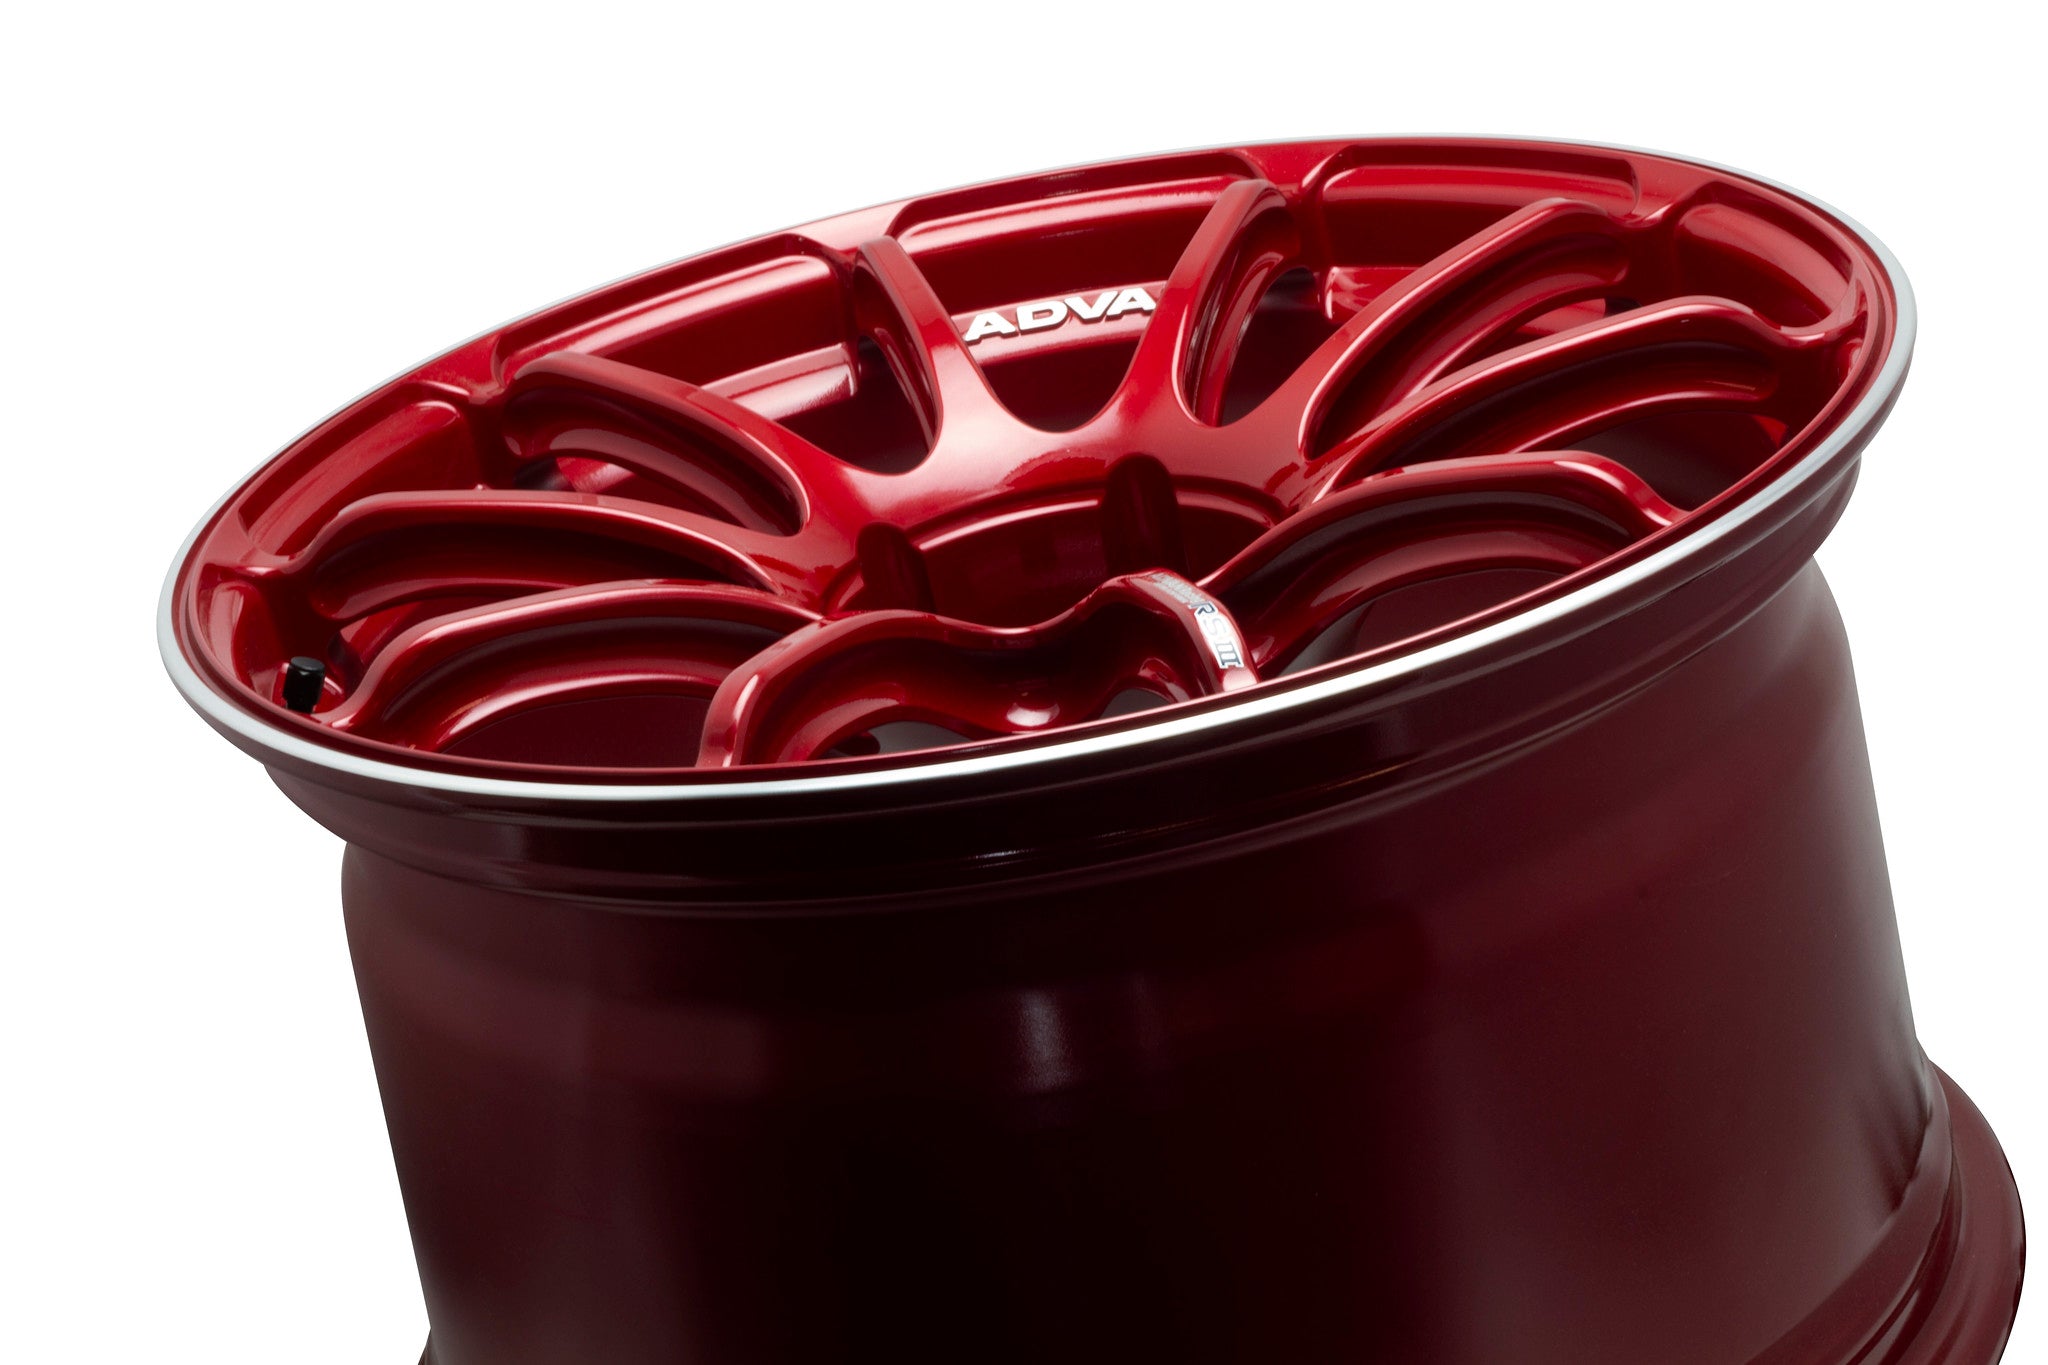 Advan Racing RSIII Racing Candy Red & Ring